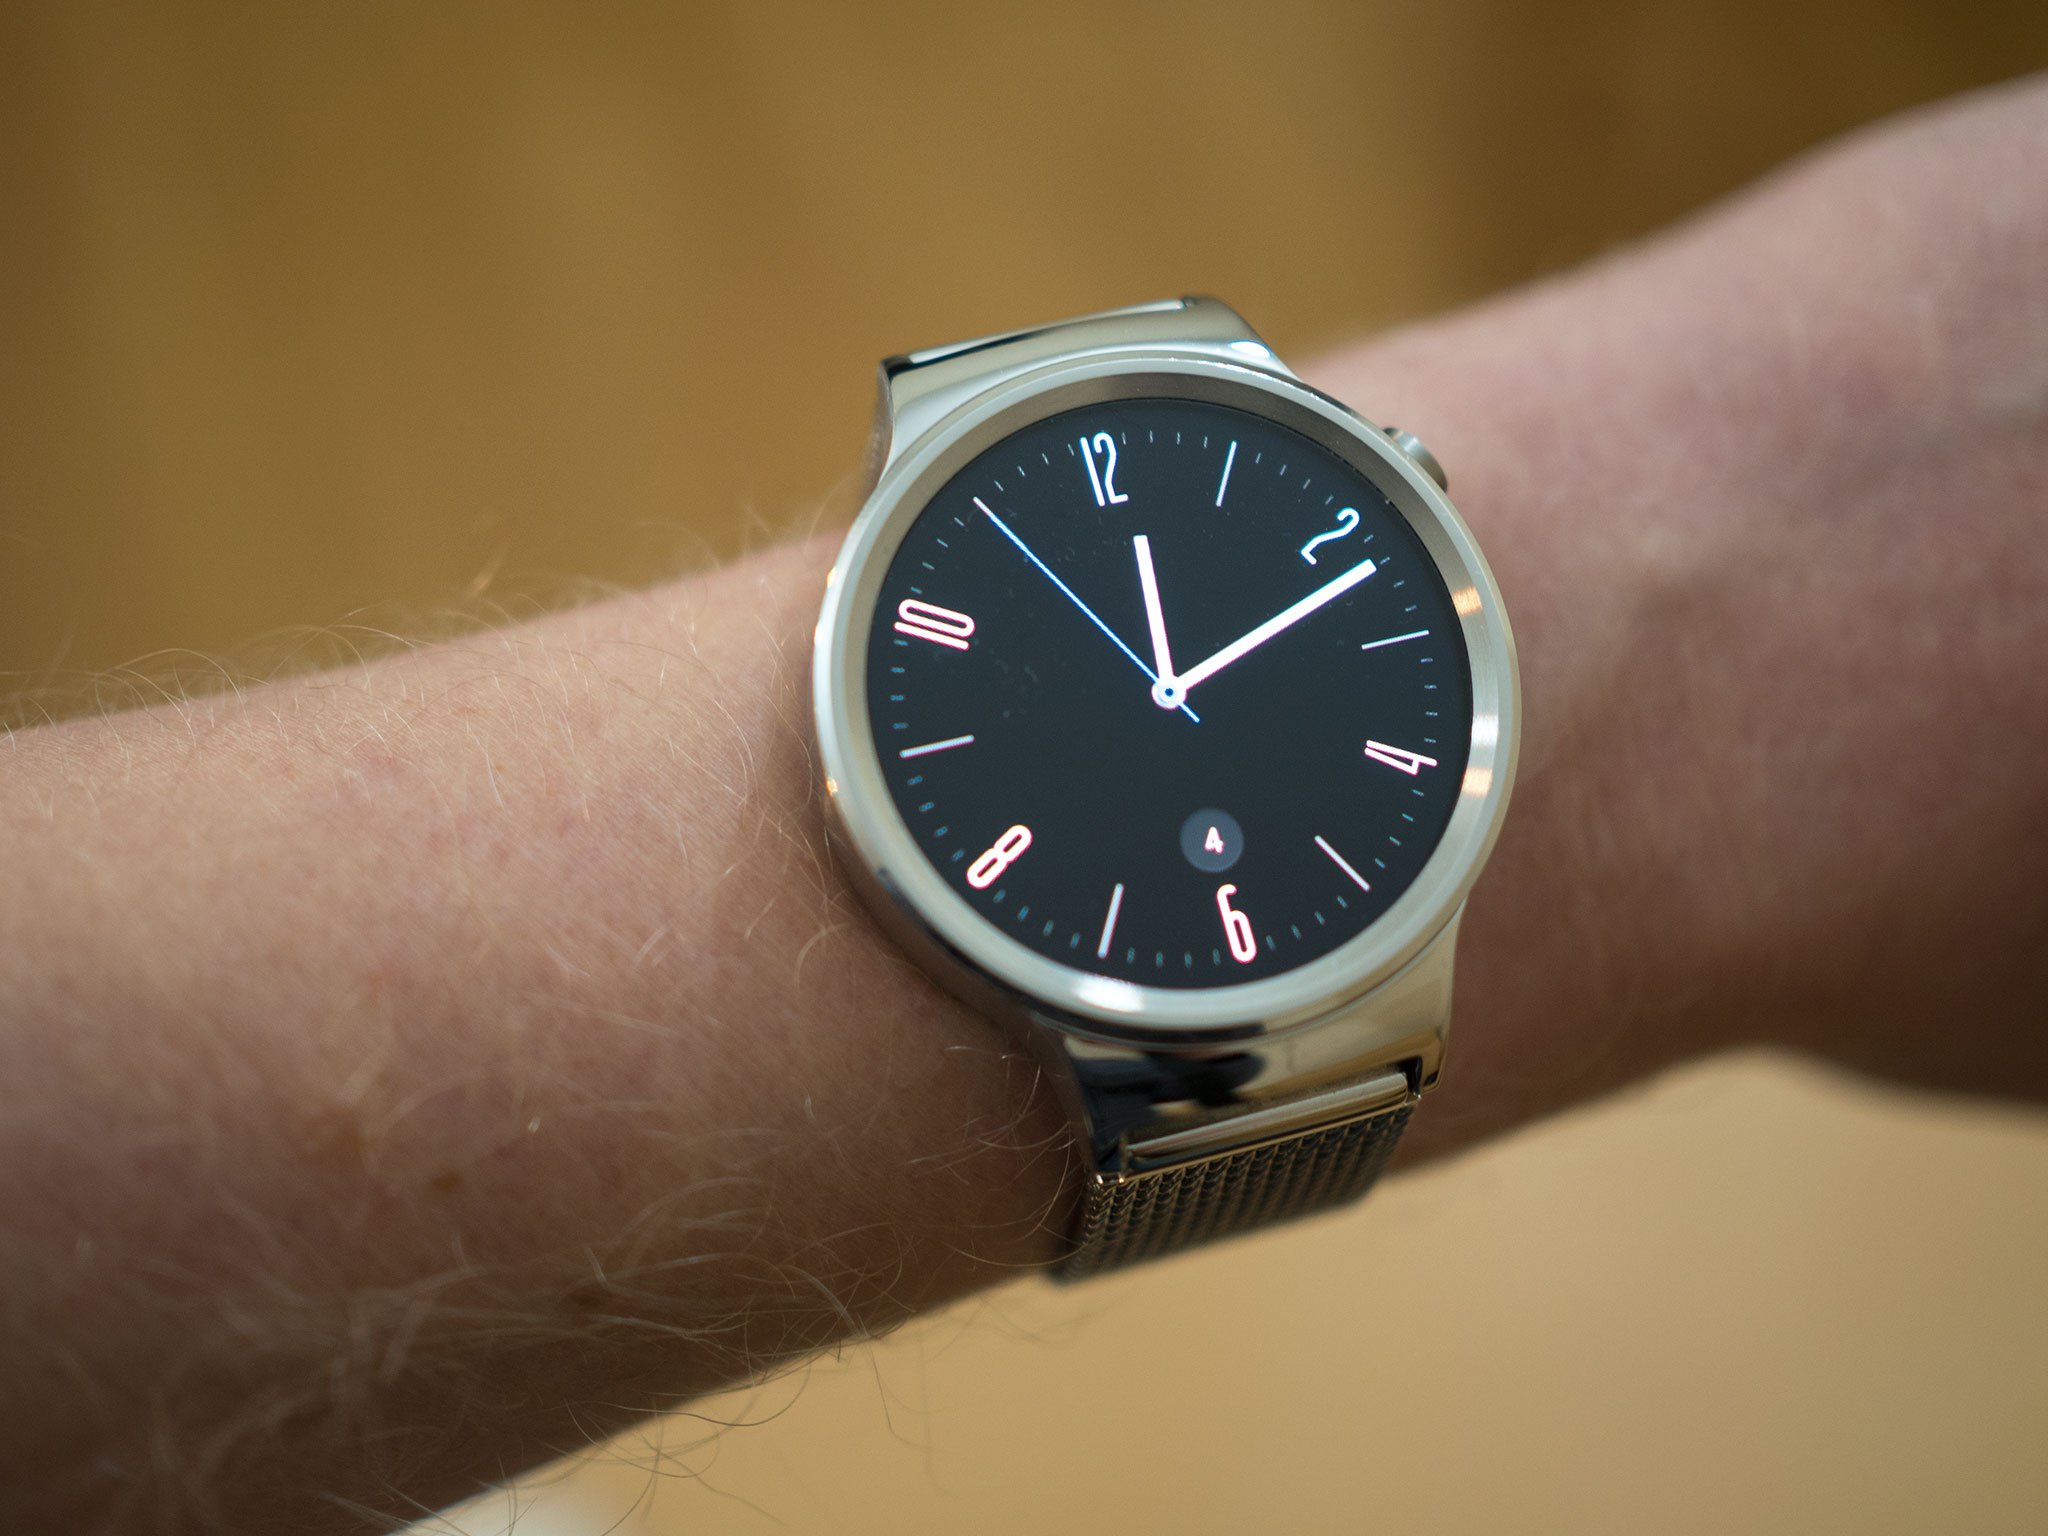 Alex Android Wear